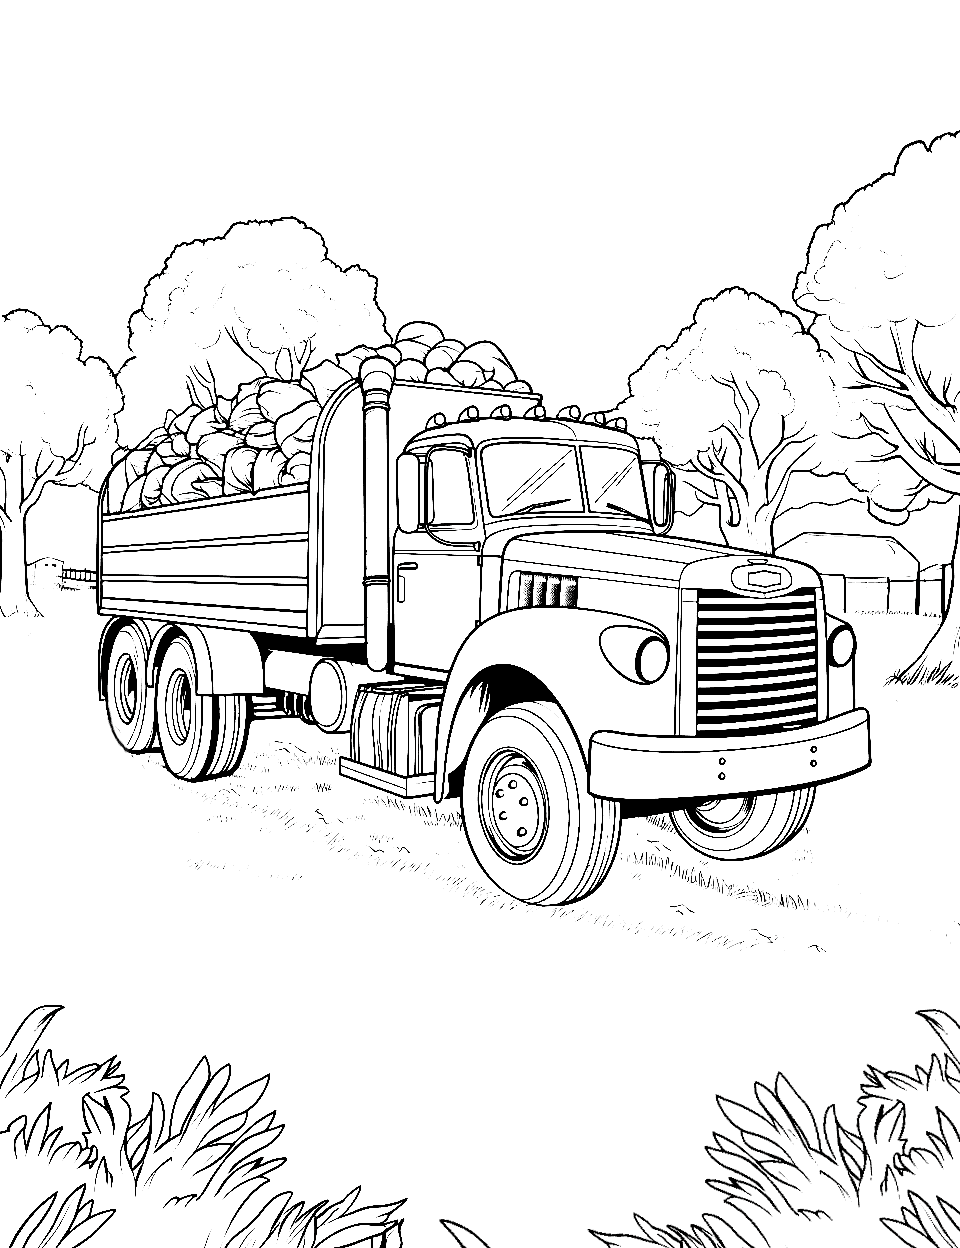 Harvest Time Coloring Page - A truck filled with various fresh fruits and vegetables parked next to an orchard.